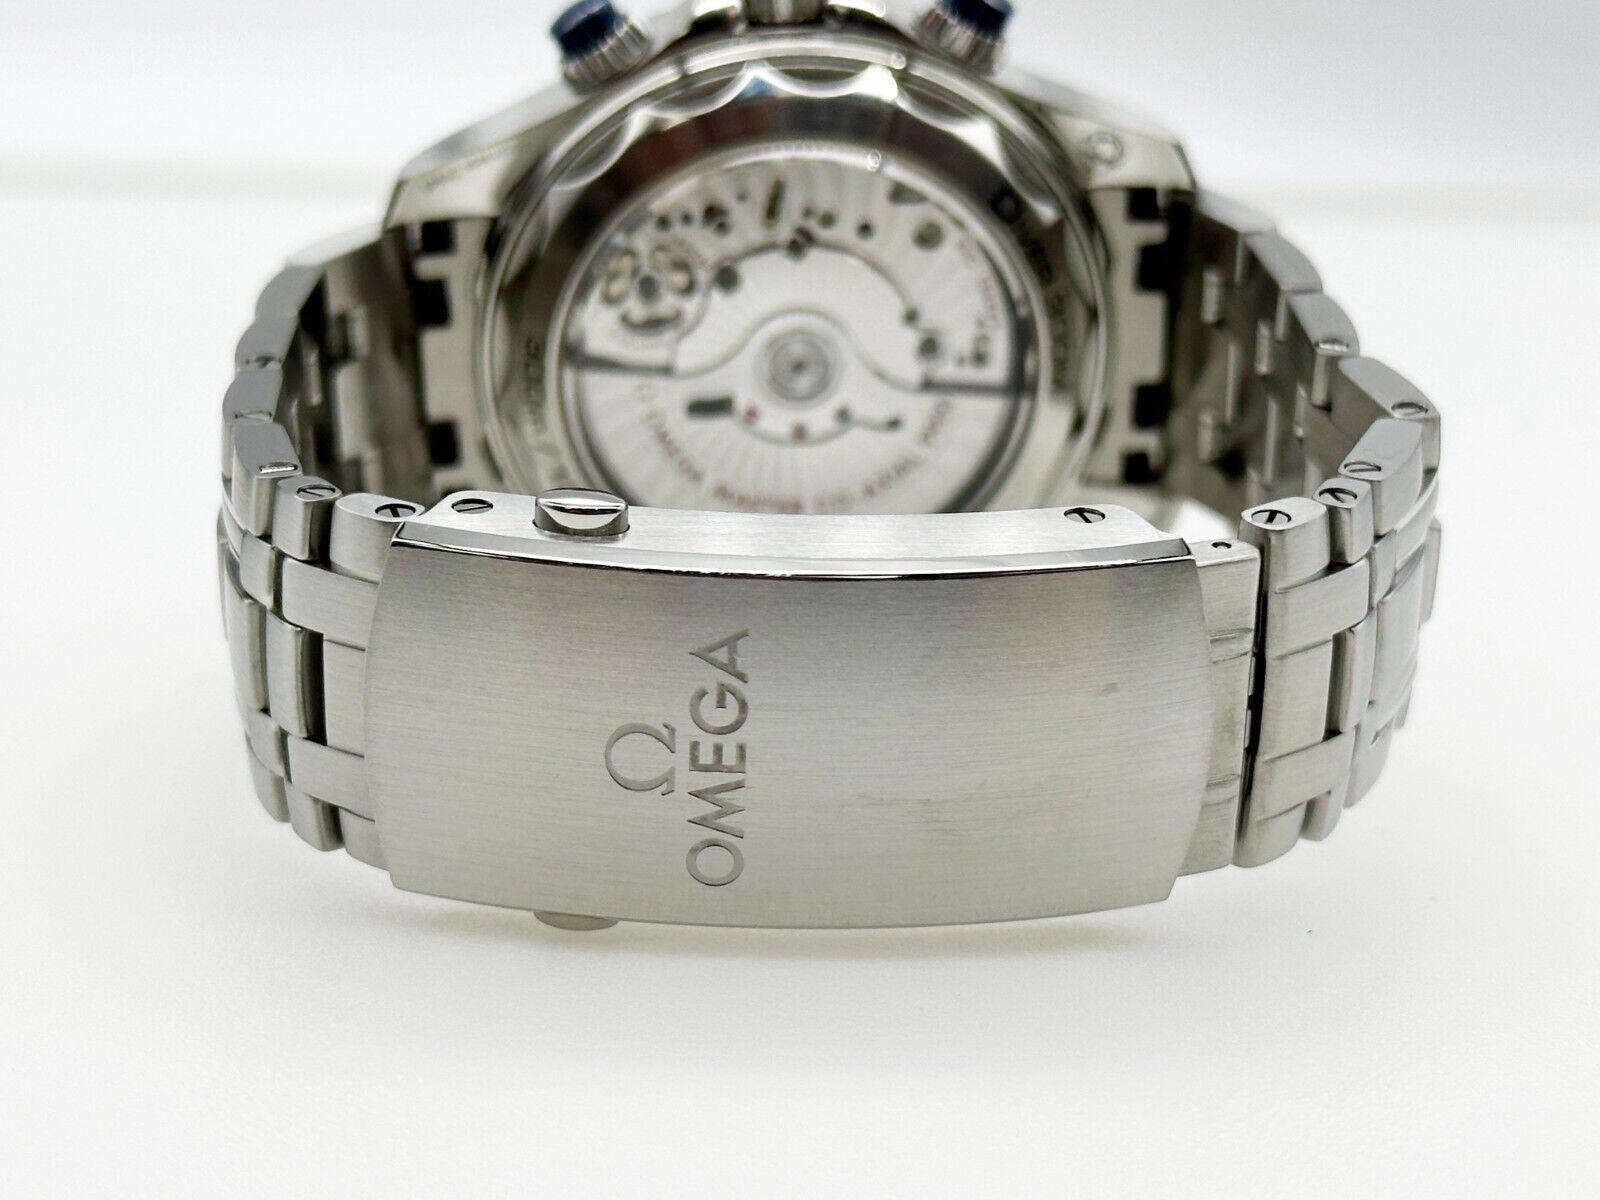 Omega 210.30.44.51.06.001 Seamaster Chronograph Stainless Steel Paper For Sale 1